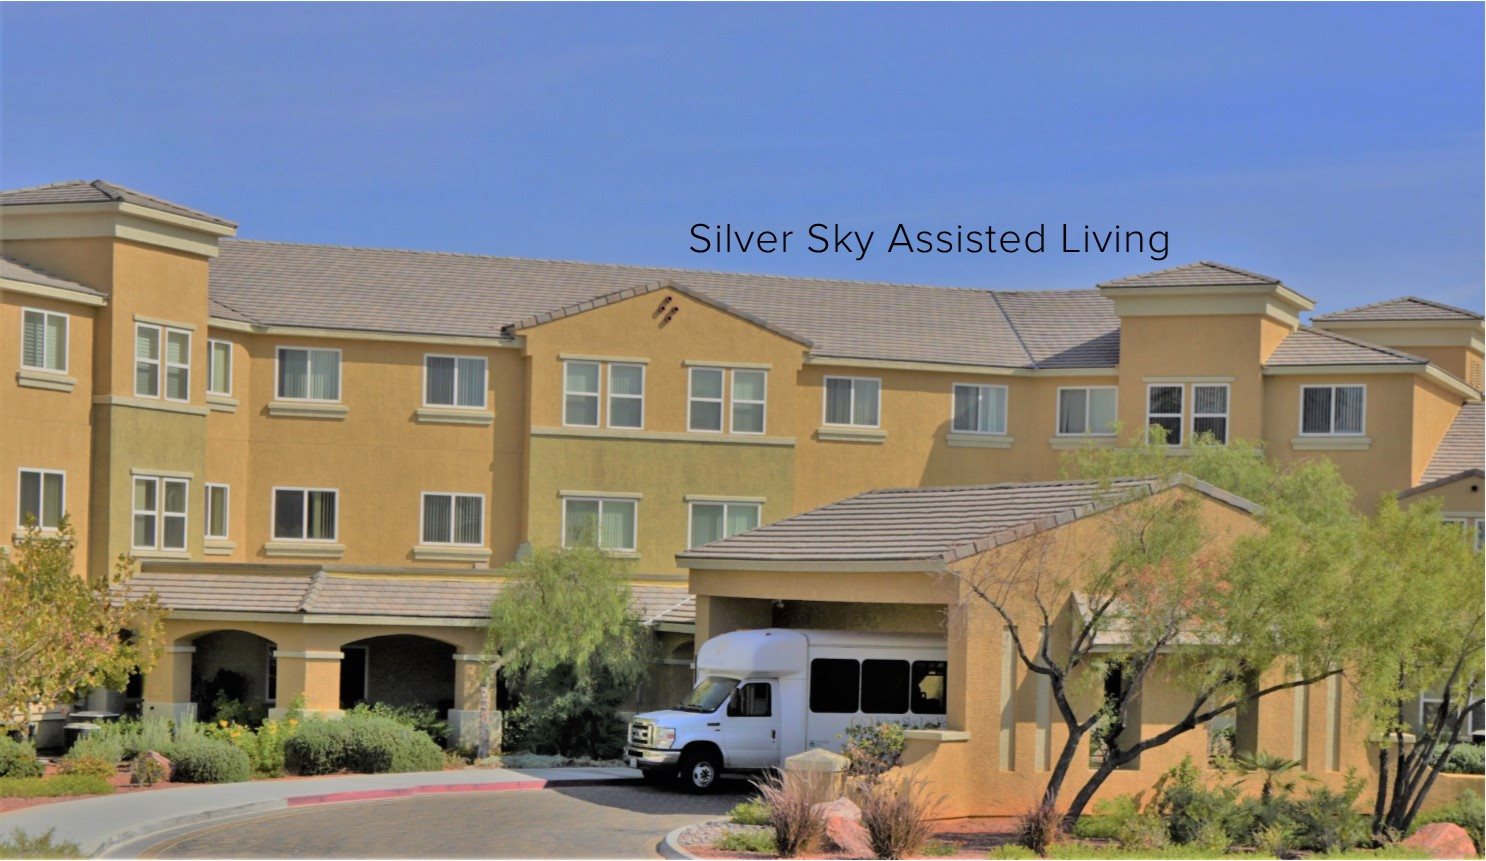 Silver Sky Assisted Living